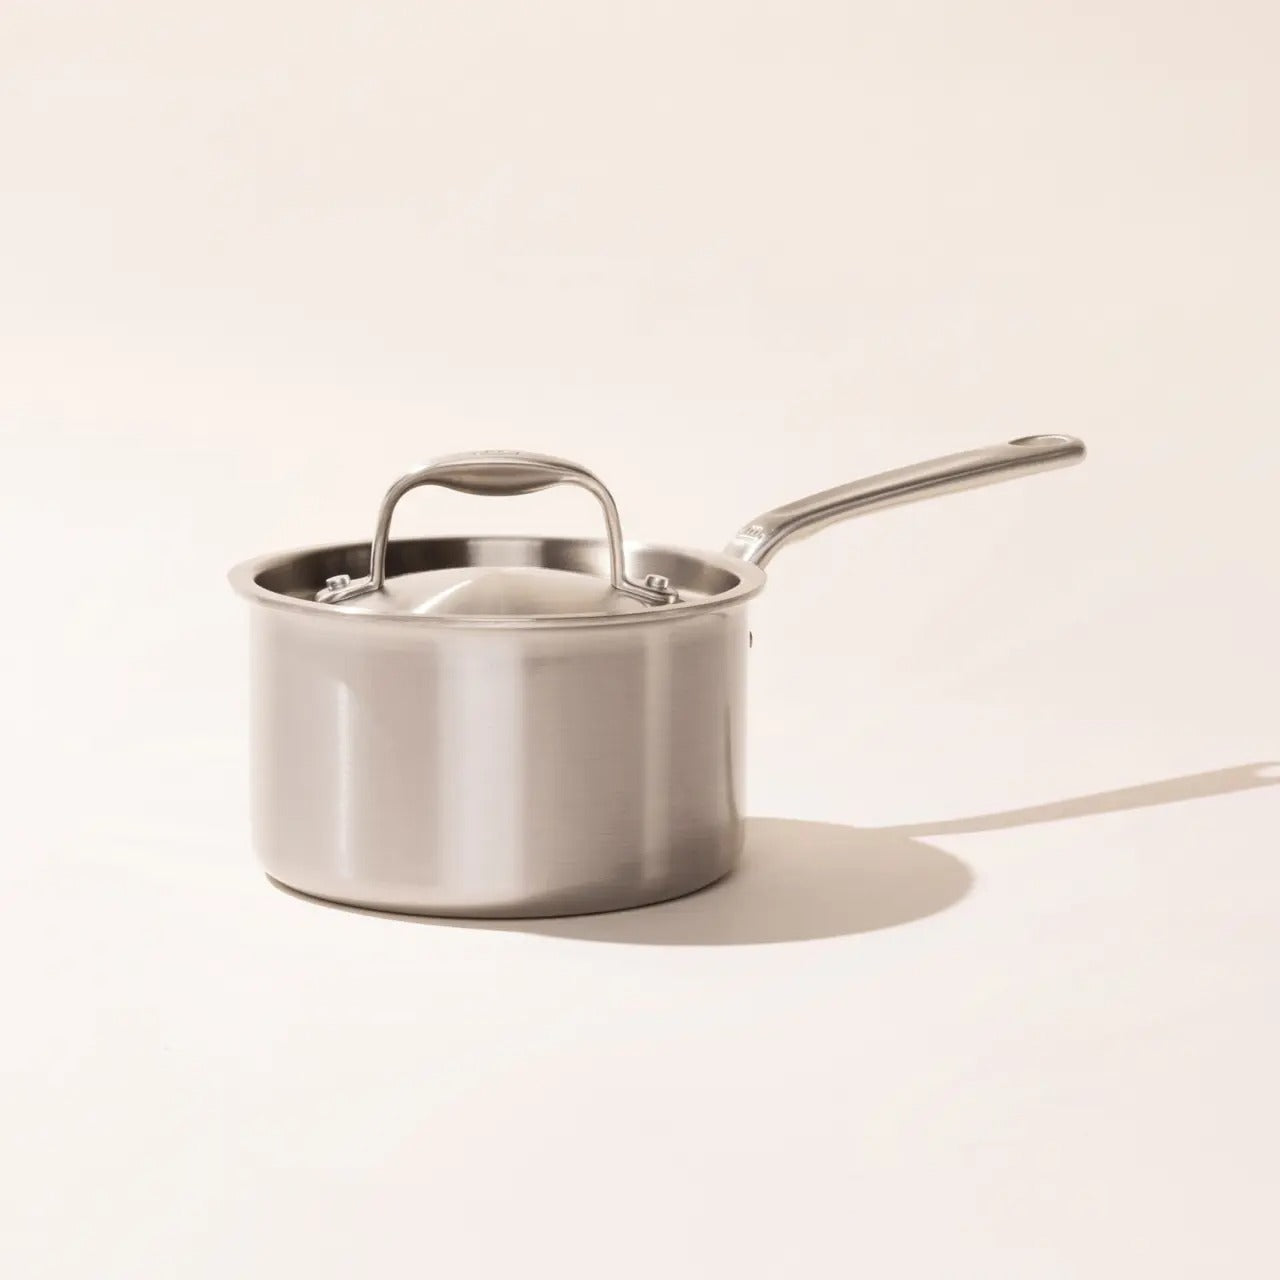 MADE IN Saucepan with Lid - 2 Quart